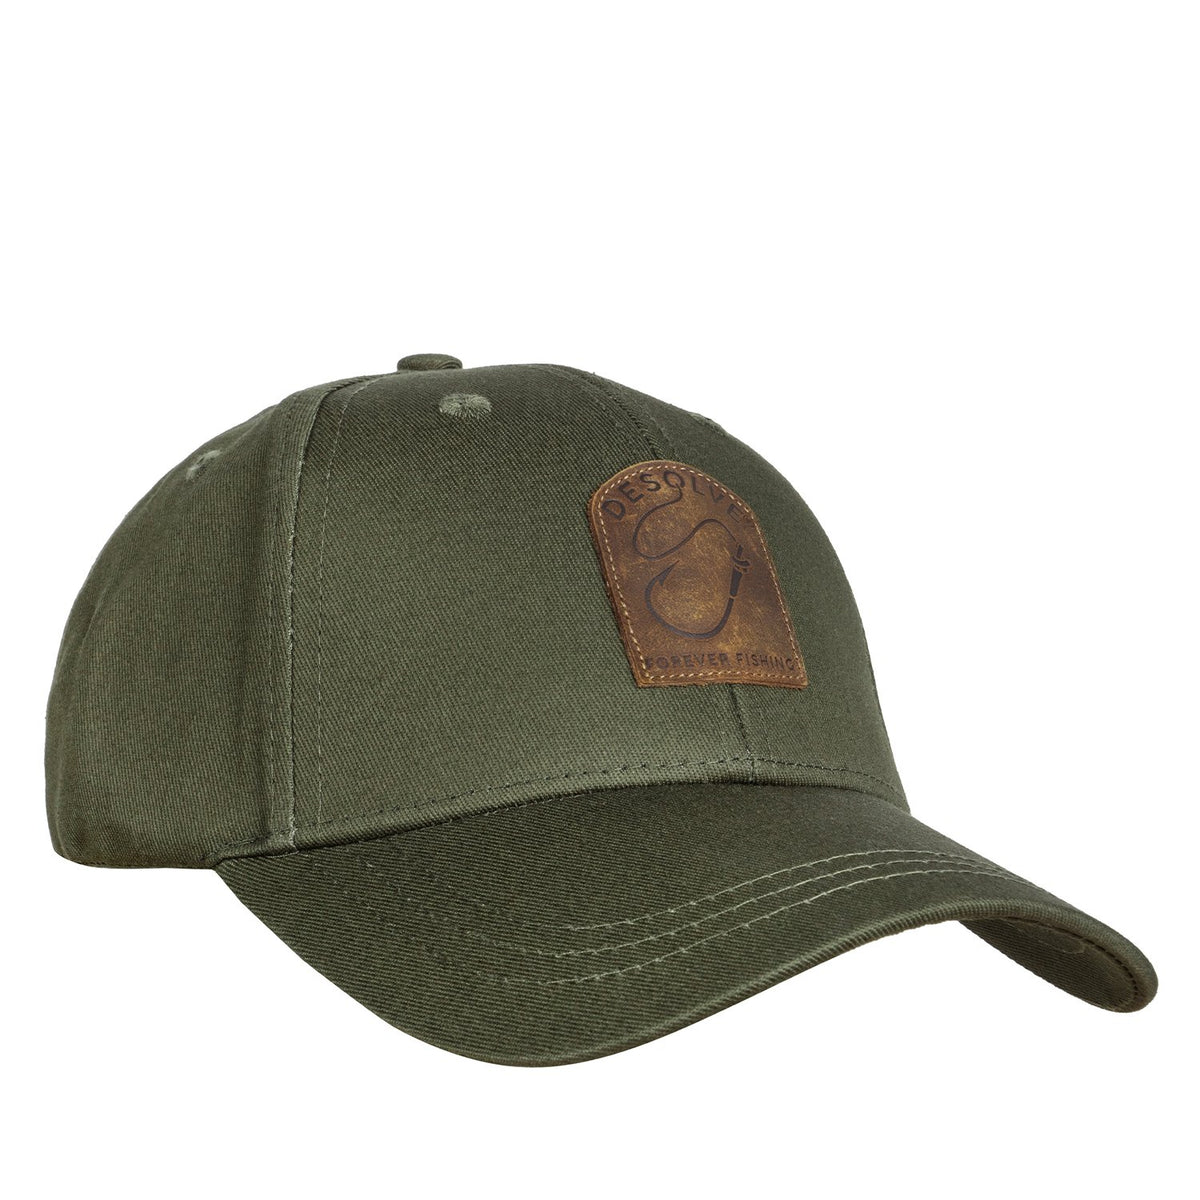 Desolve Supply Co, Tackle Cap, 100% Poly Cotton, One Size Fits Most, Fishing Hat, Mens - Desolve Supply Co.